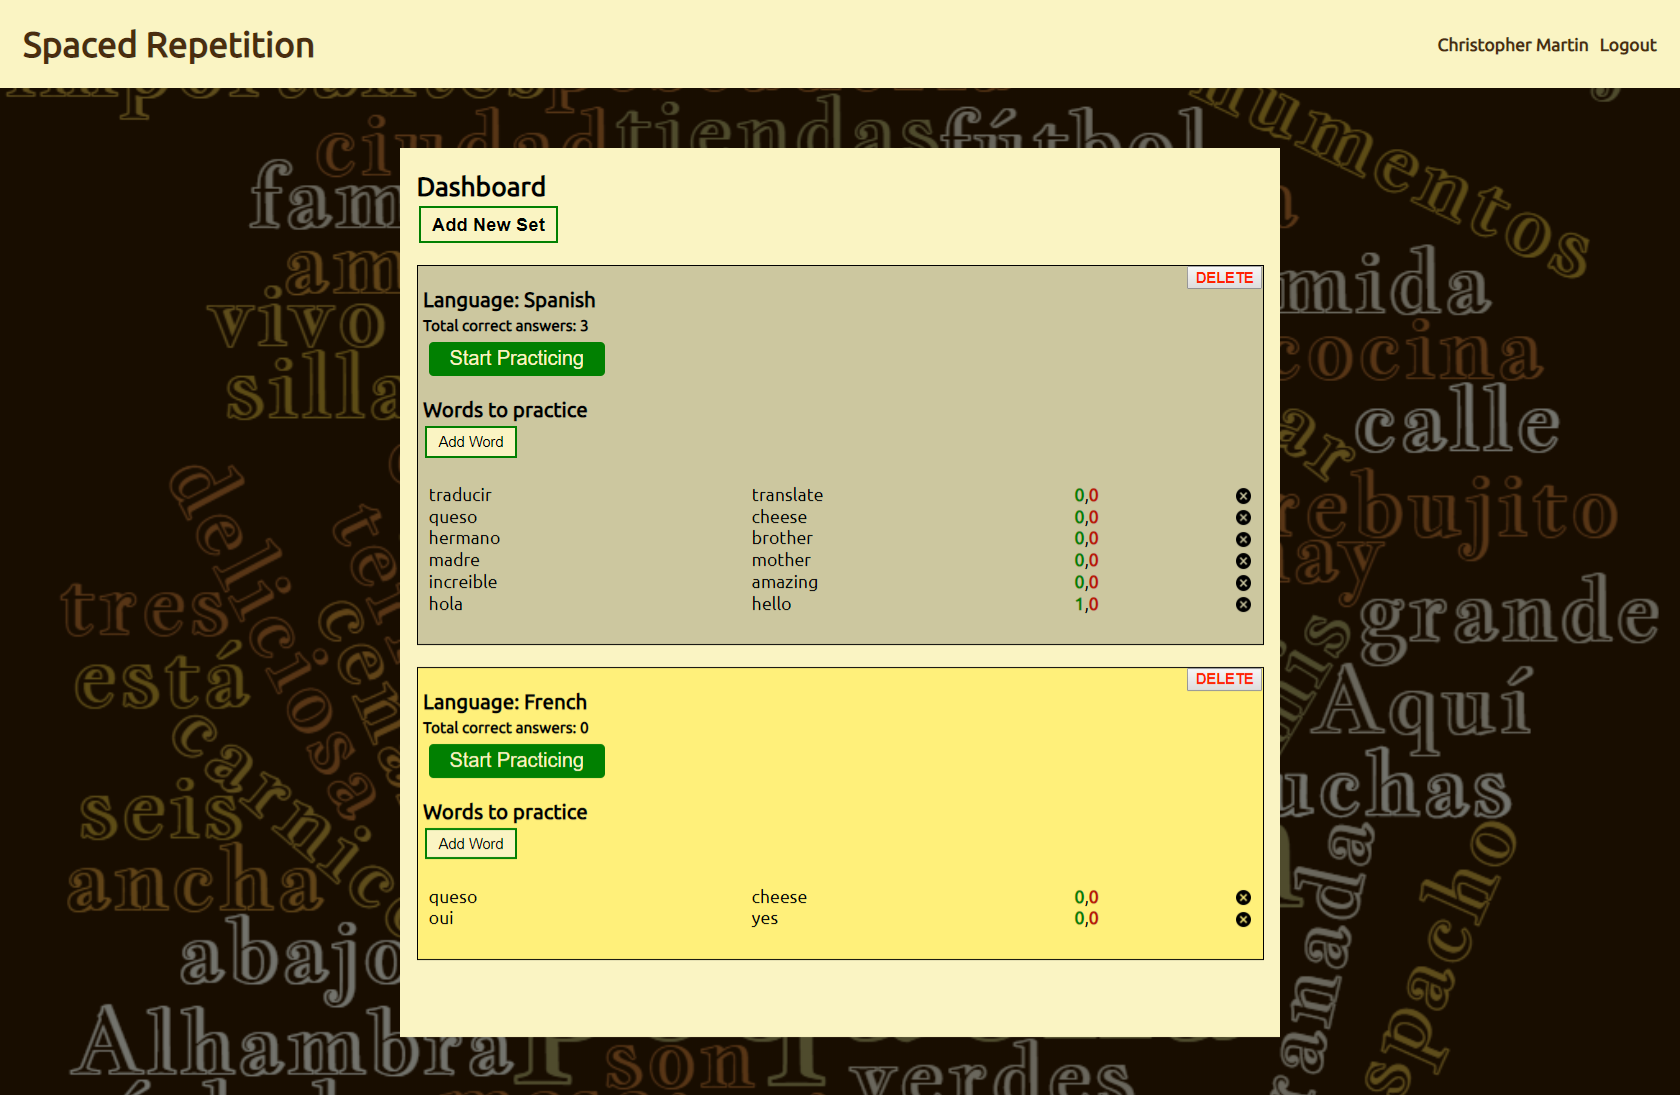 A browser screenshot of the Spaced Repetition App